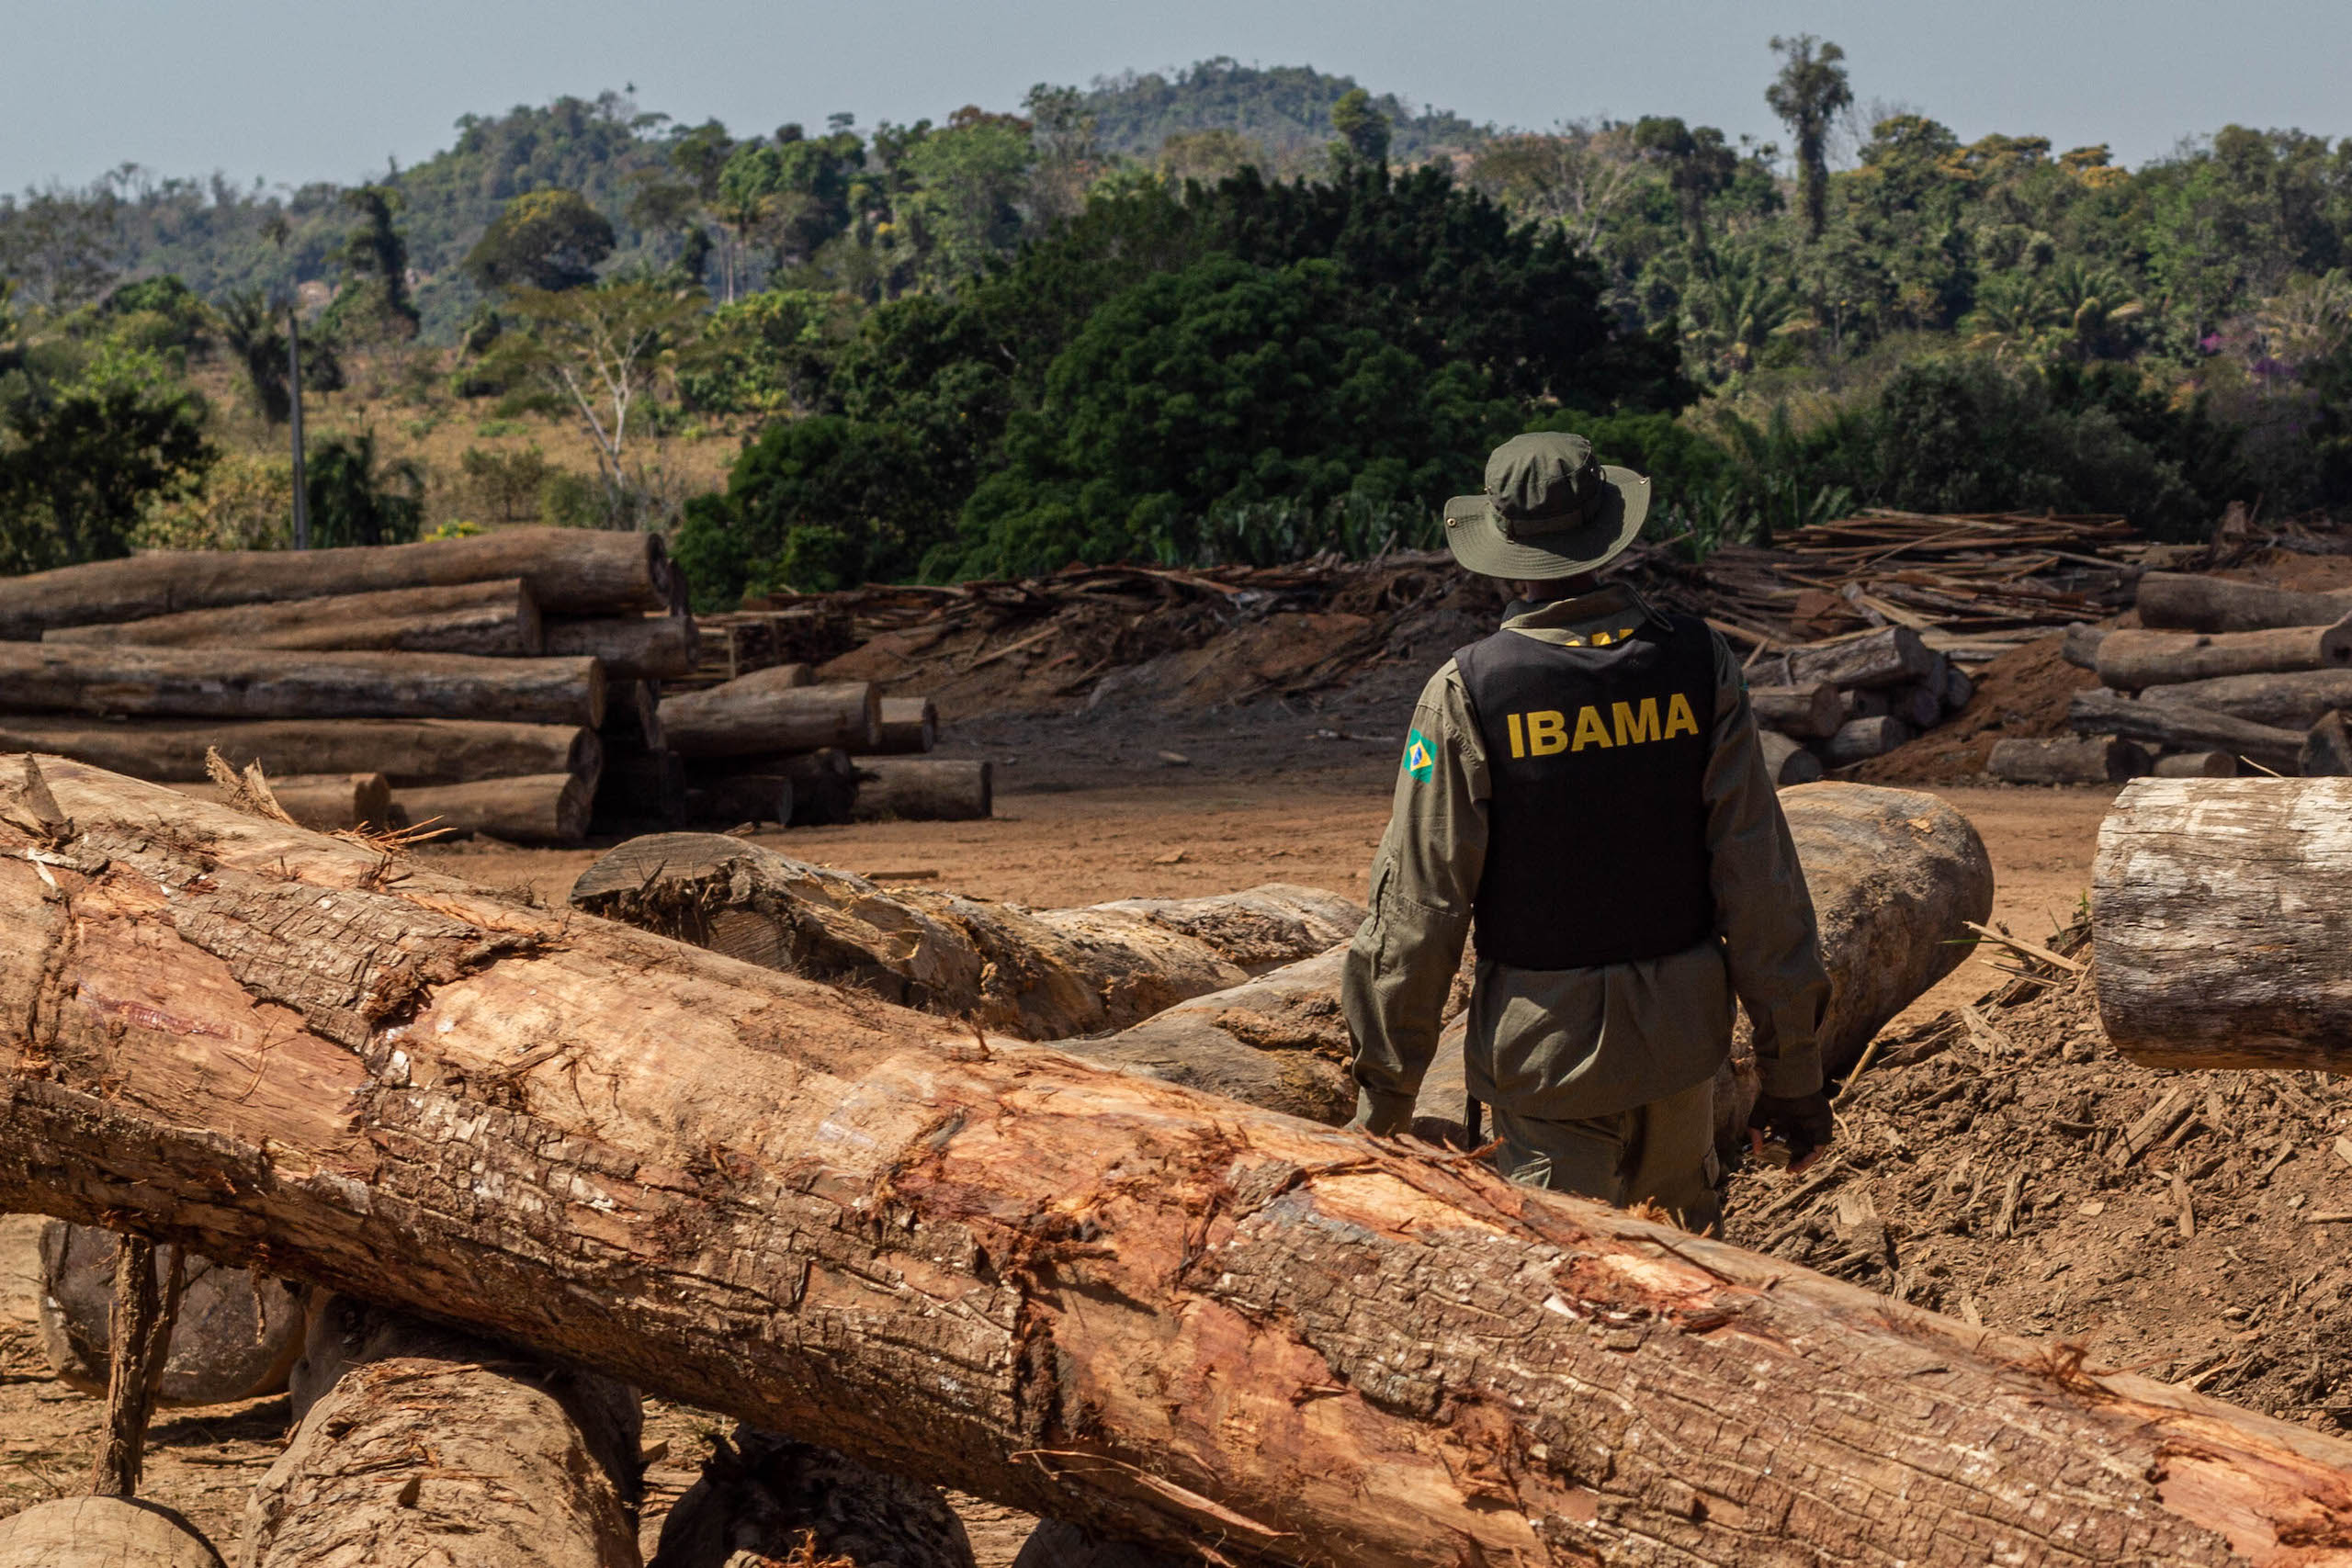 An officer from the Brazilian Institute of Environment and Renewable Natural Resources (IBAMA) inspects seized timber and illegal deforestation in the Amazon, Rondônia state, Brazil. (Image: Fernando Augusto / IBAMA,  CC BY SA)